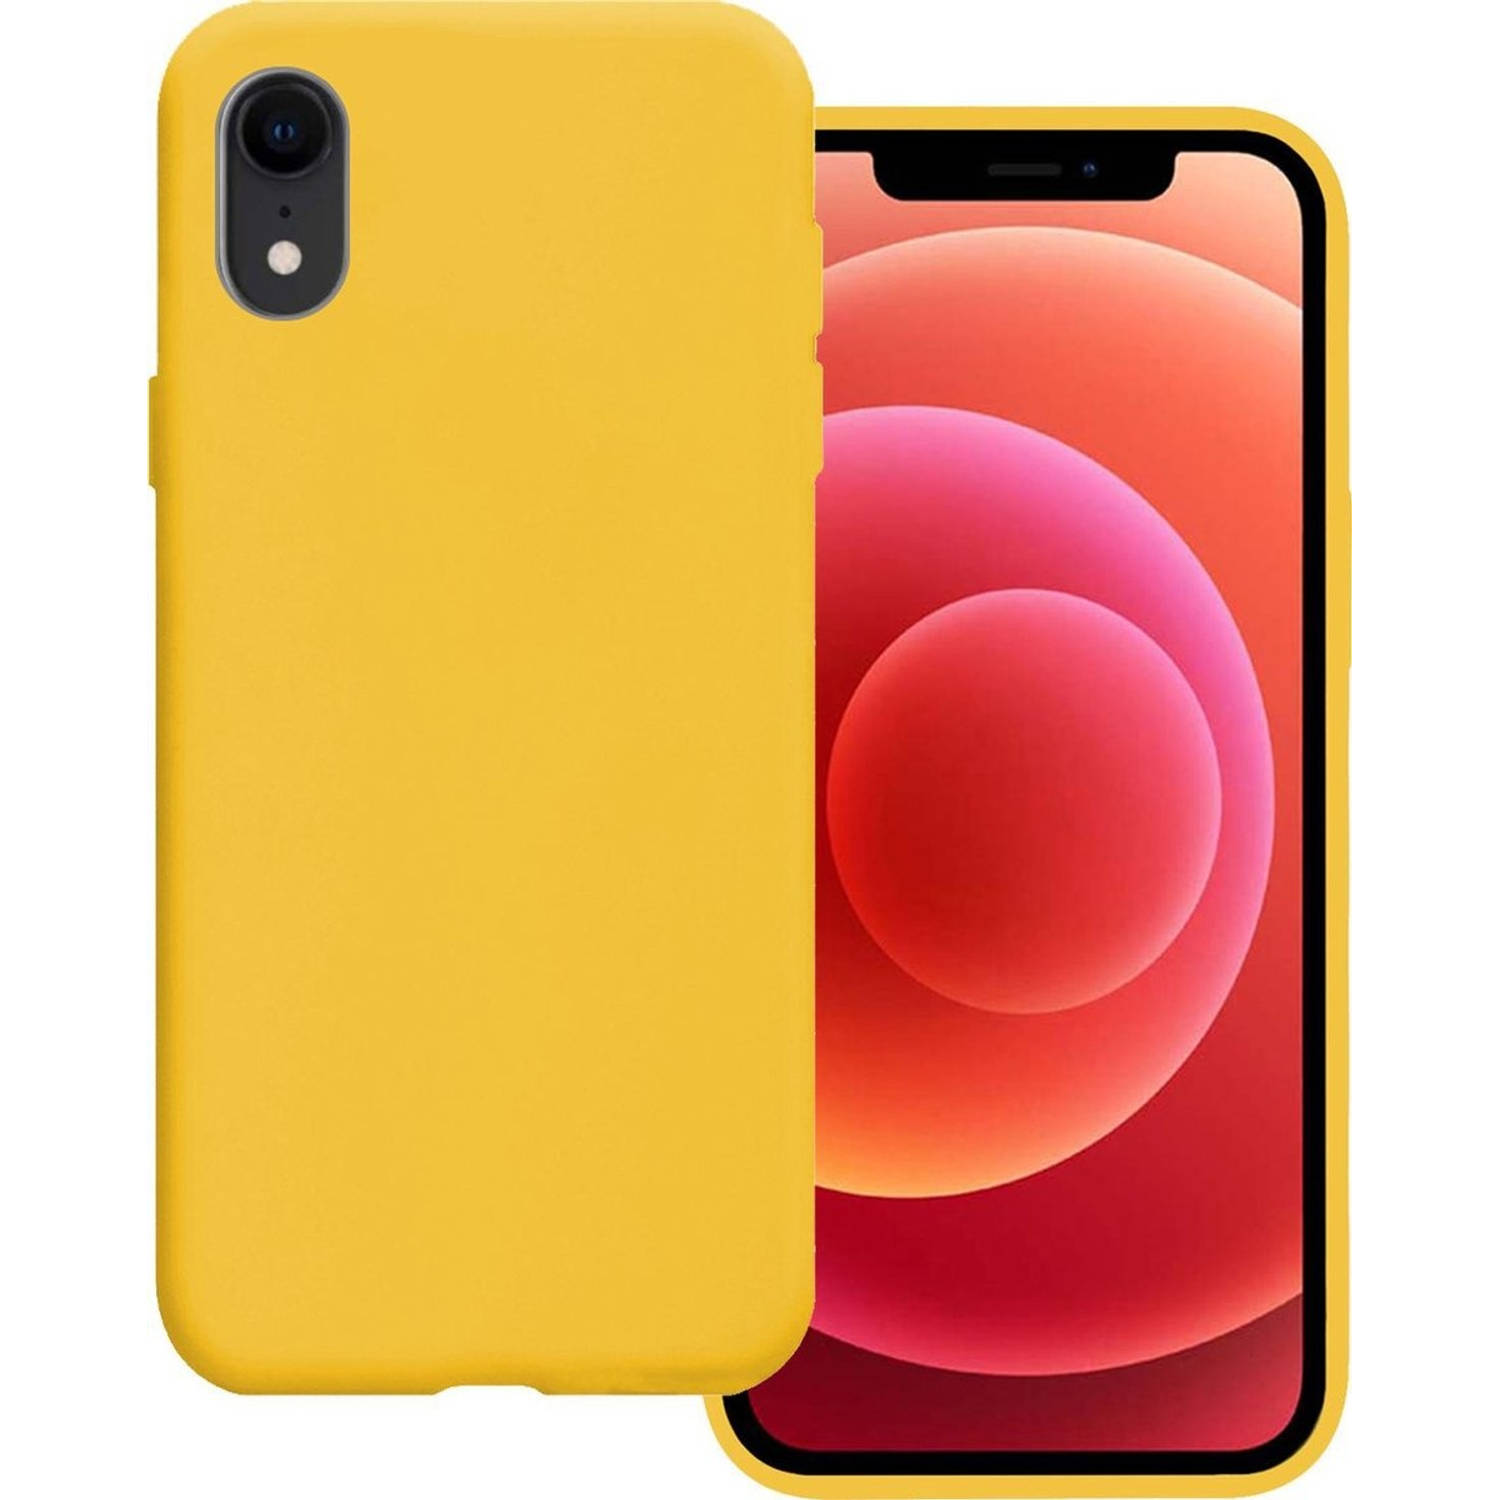 Basey Apple Iphone Xr Hoesje Siliconen Hoes Case Cover Apple Iphone Xr-geel